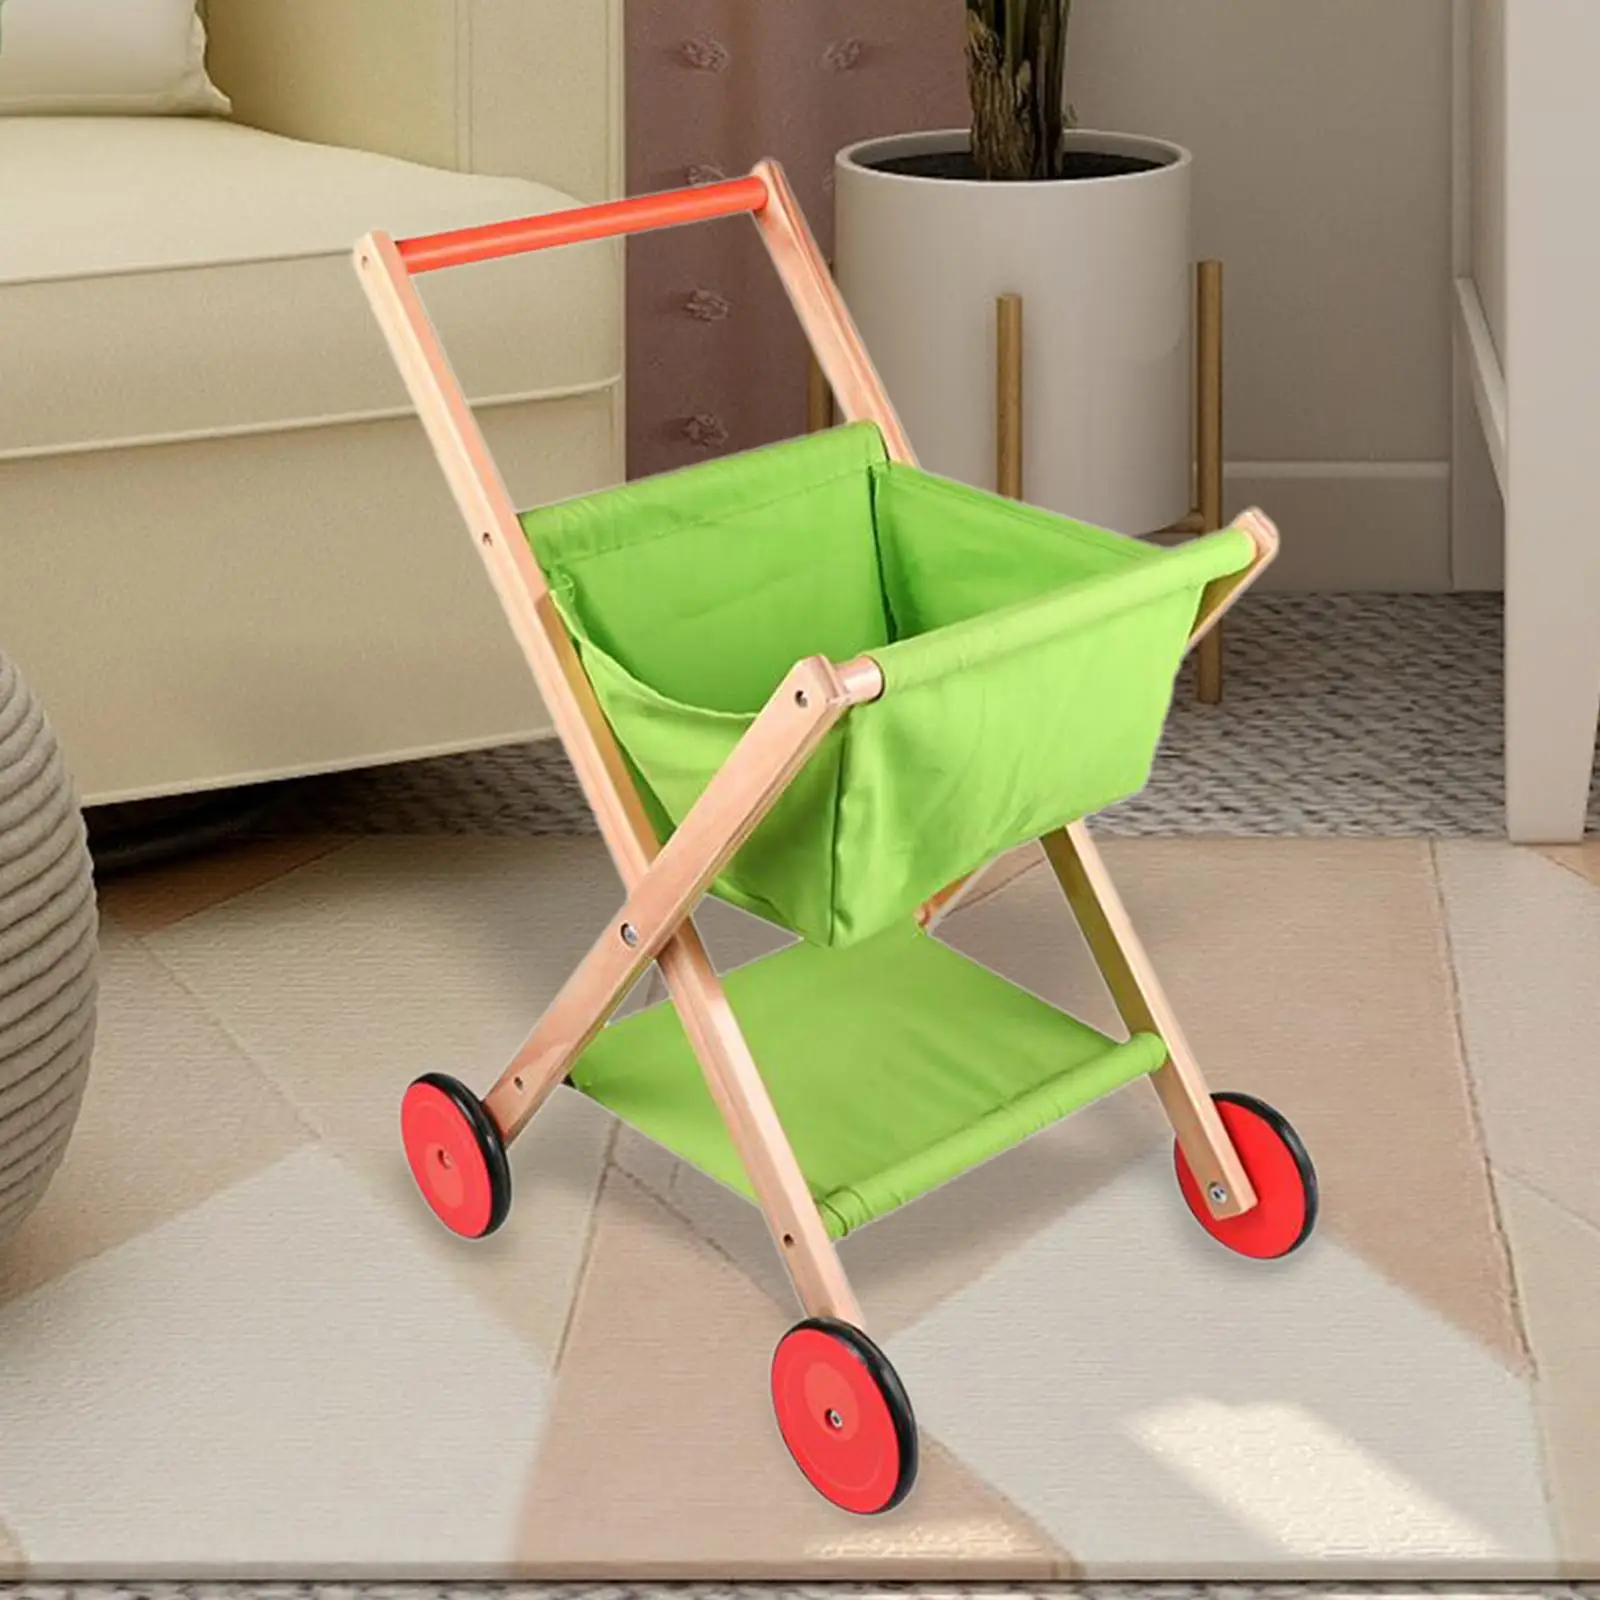 Wooden Shopping Cart ,Perfect Role Play Toy, Promotes Creativity and Imagination for Girls Boys